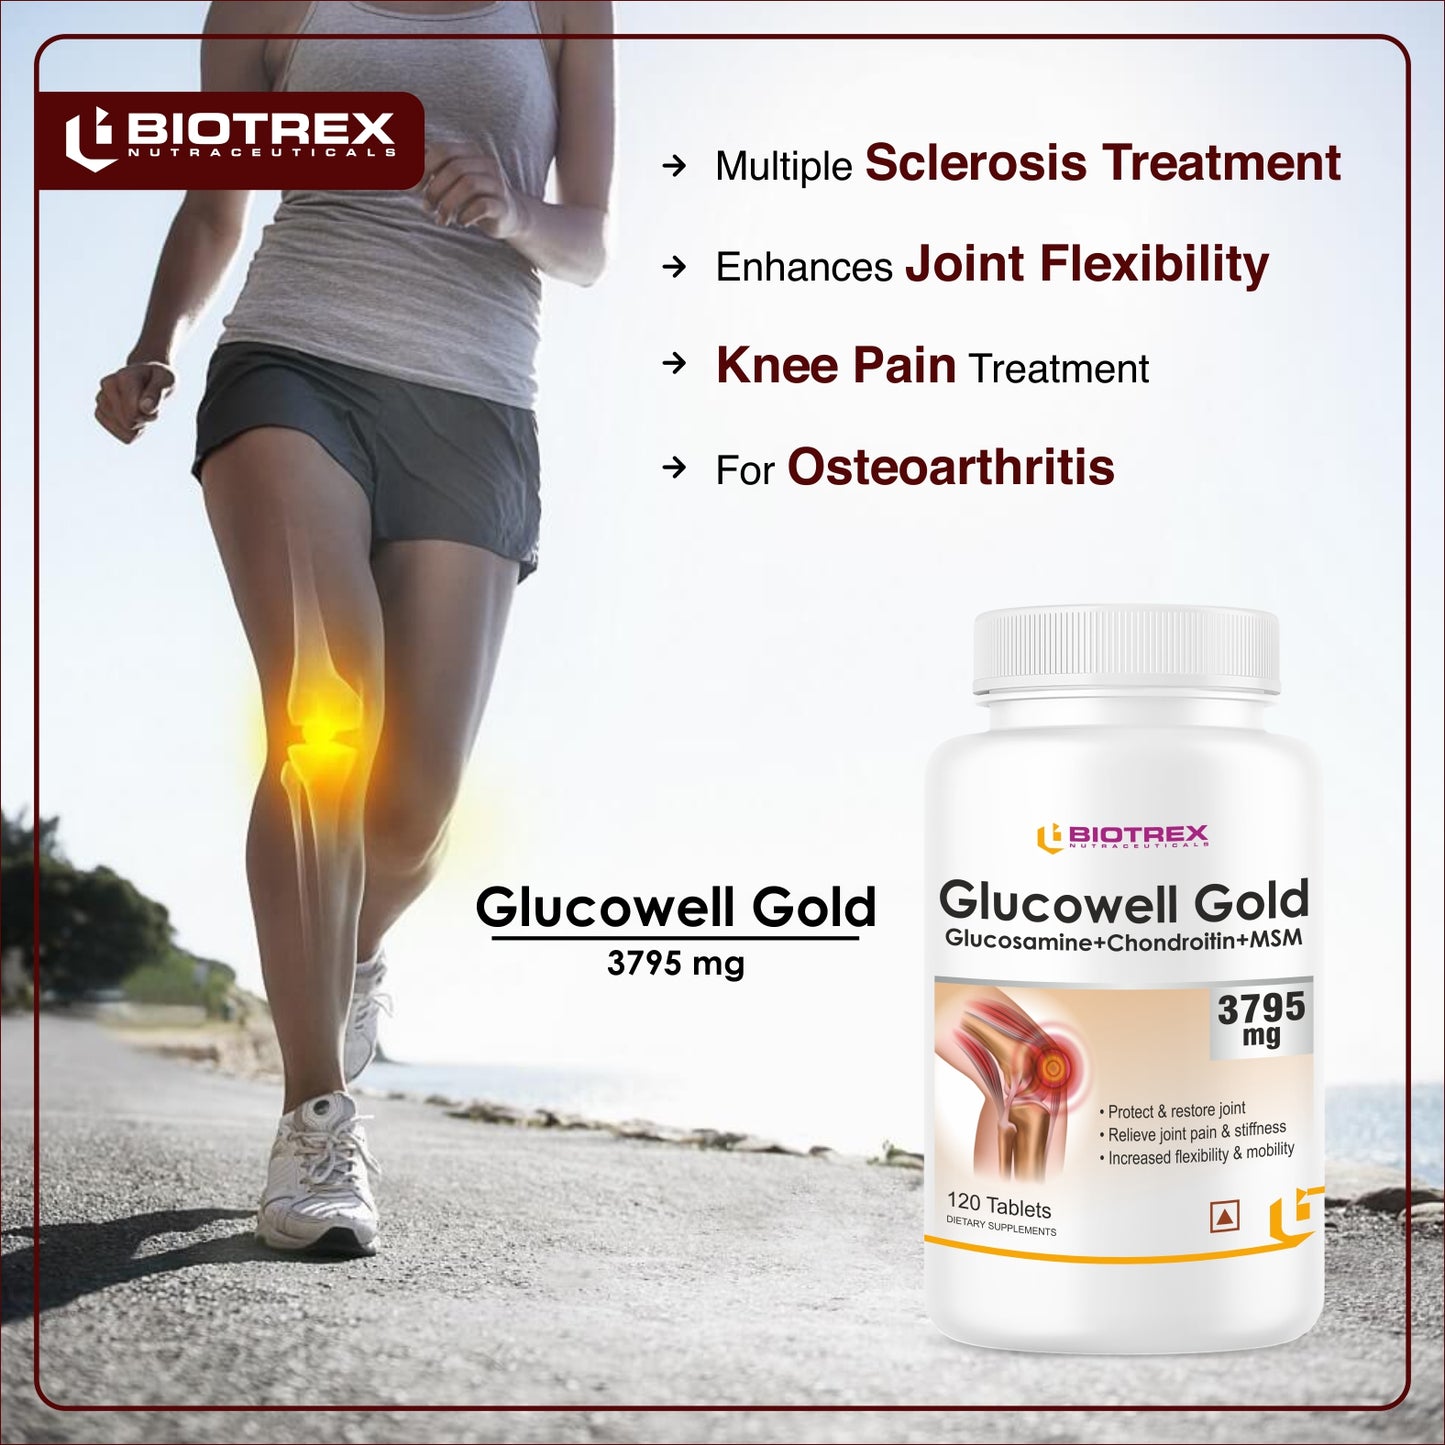 Biotrex Nutraceuticals Glucowell GOLD Glucosamine+ Chondroitin + MSM 3795mg - Maximum strength of Glucosamine with MSM (120 Tablets)